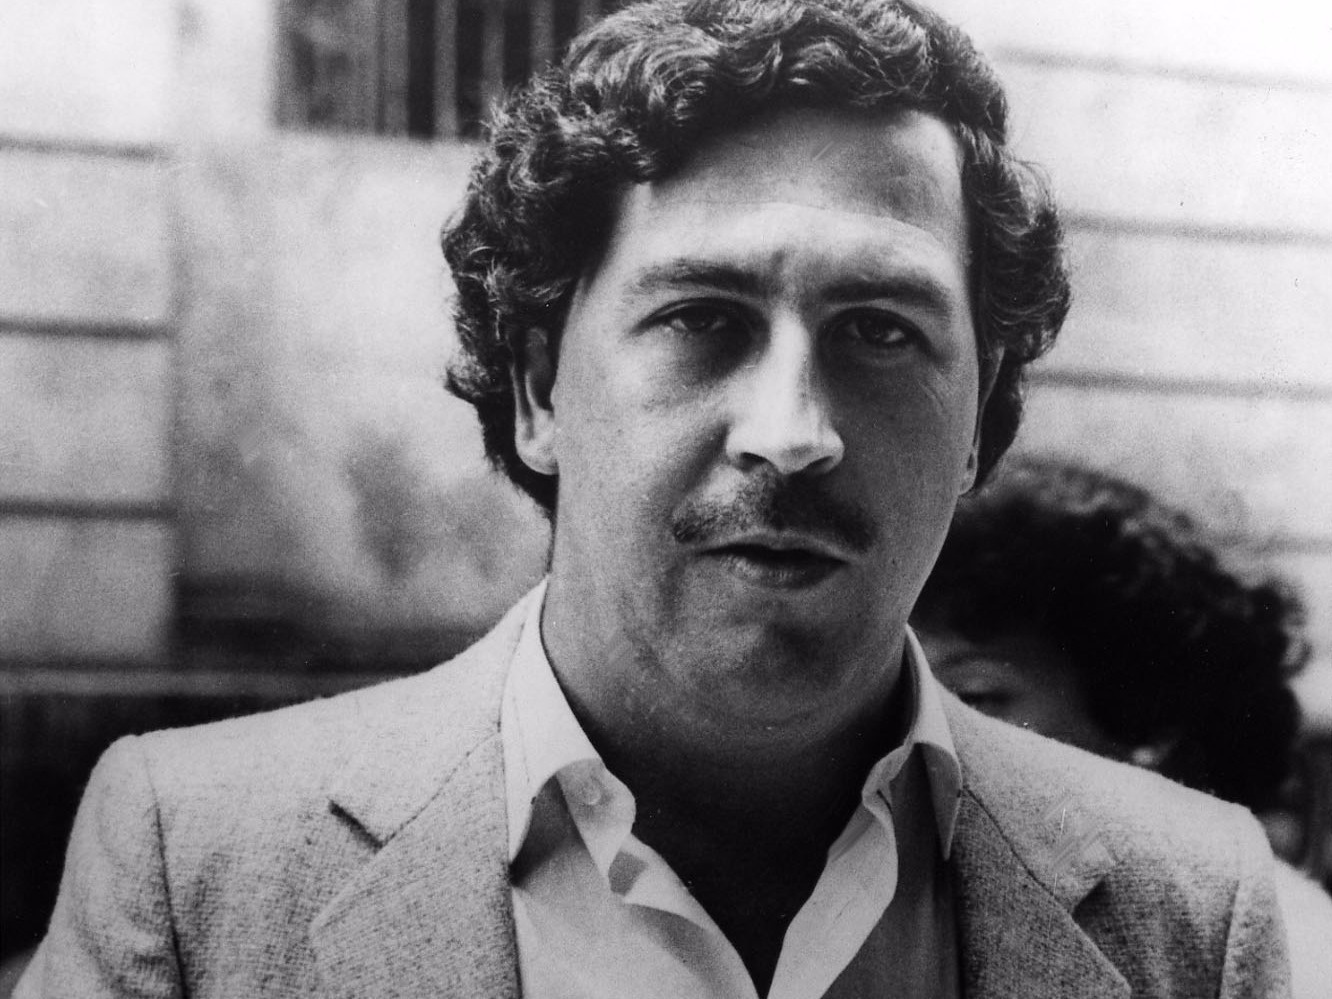 Cartel leader Pablo Escobar made an estimated $420 million a week in revenue from his drug trade empire.
The "king of cocaine," had so much money stacked in warehouses, barns, and underground that he had a monthly budget of $2,500 for rubber bands to keep the money bundled in stacks.